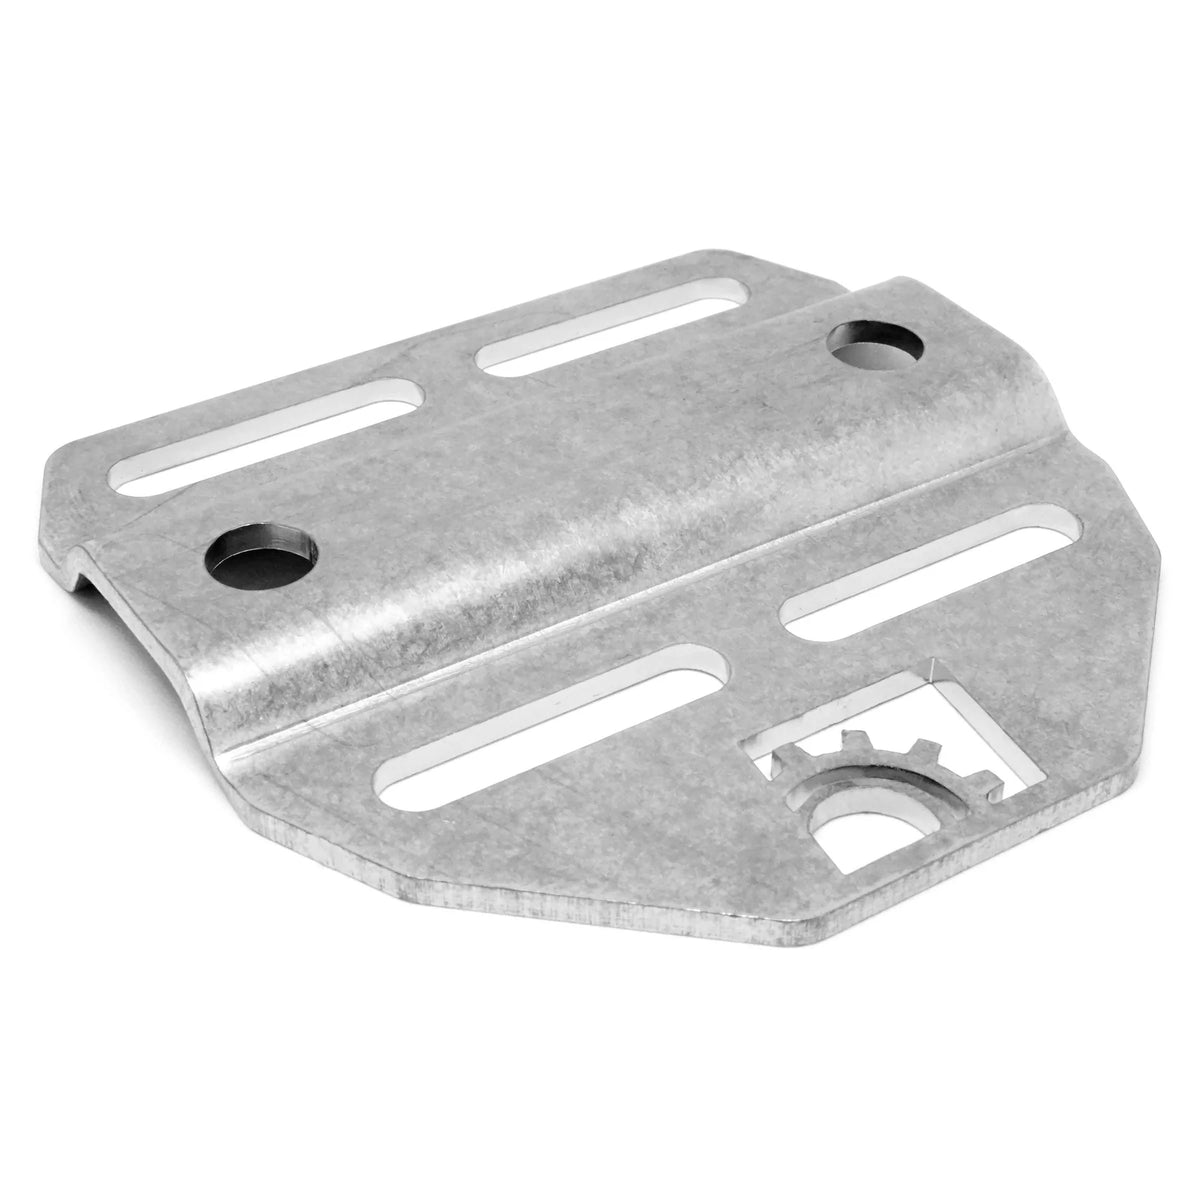 ROTOPAX Tank Container Mount Bracket For BuiltRight MOLLE Panel